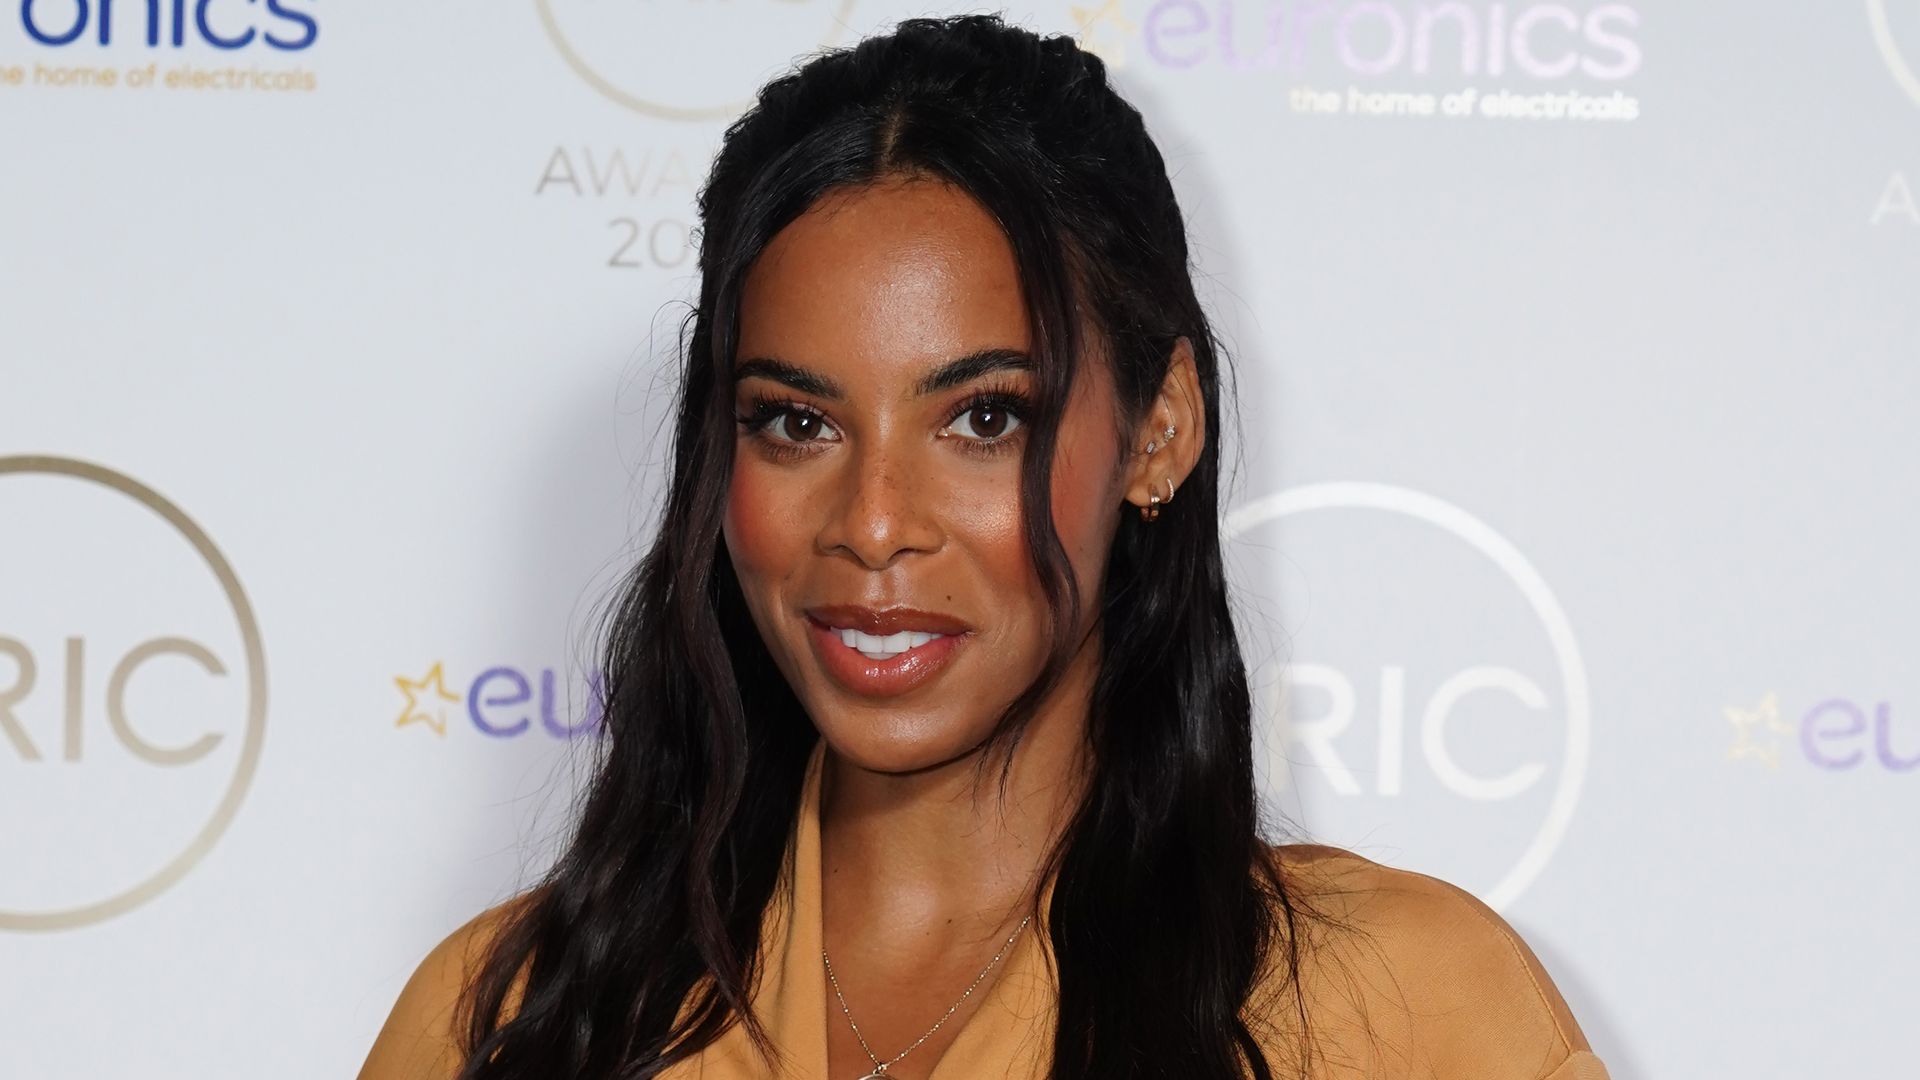 Rochelle Humes arriving for the TRIC Awards 2022 at Grosvenor House, London. 